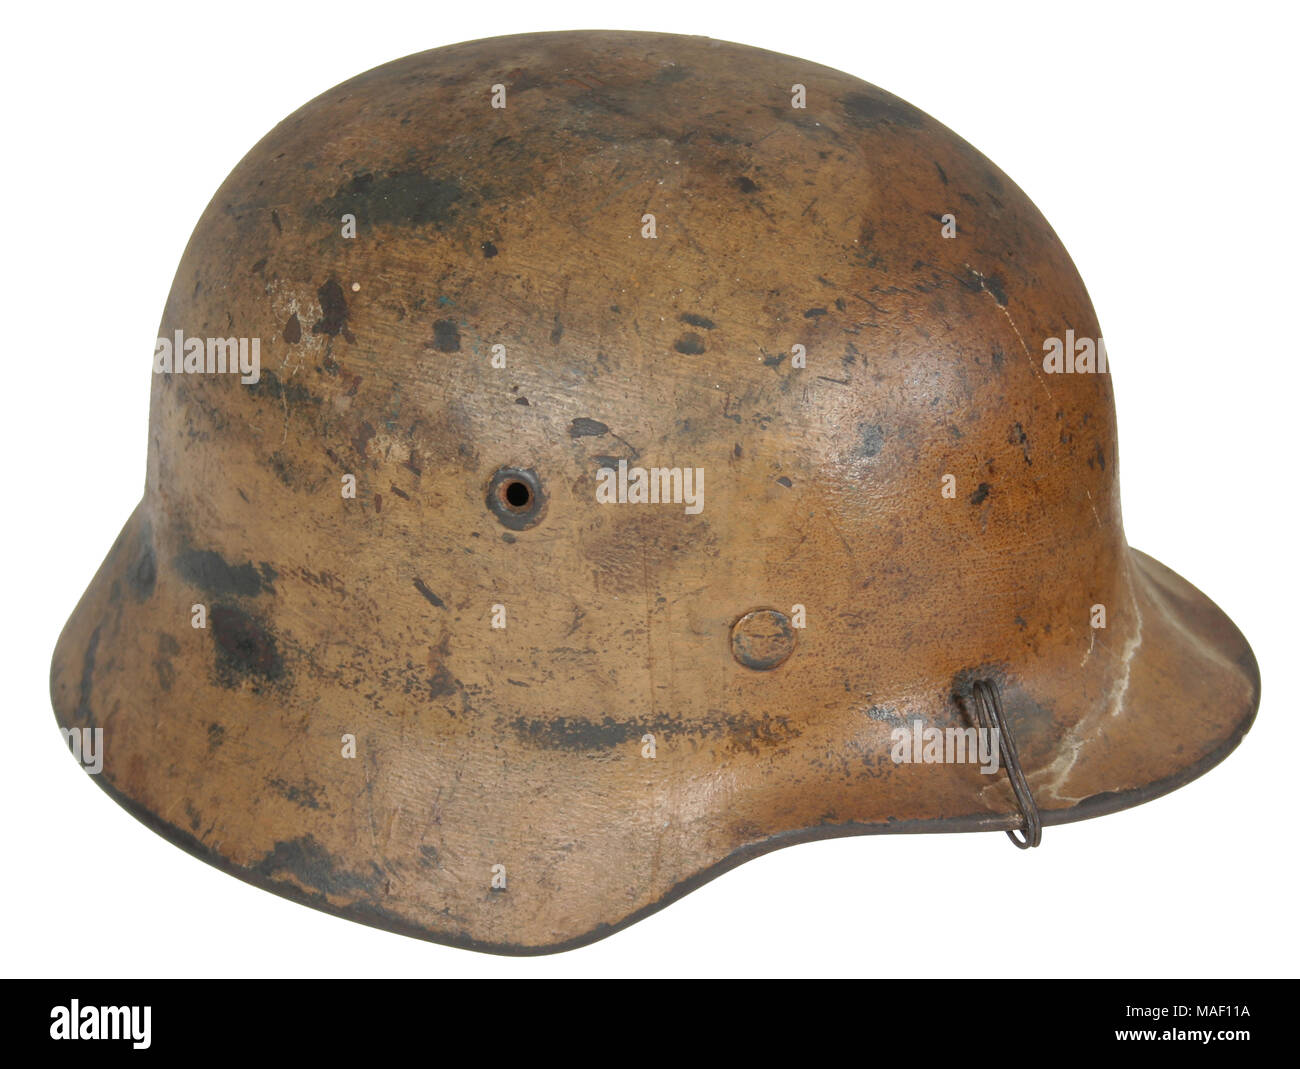 World War 2 German m35 Helmet with tan North Africa paint camouflage used by the Afrika Korps Stock Photo